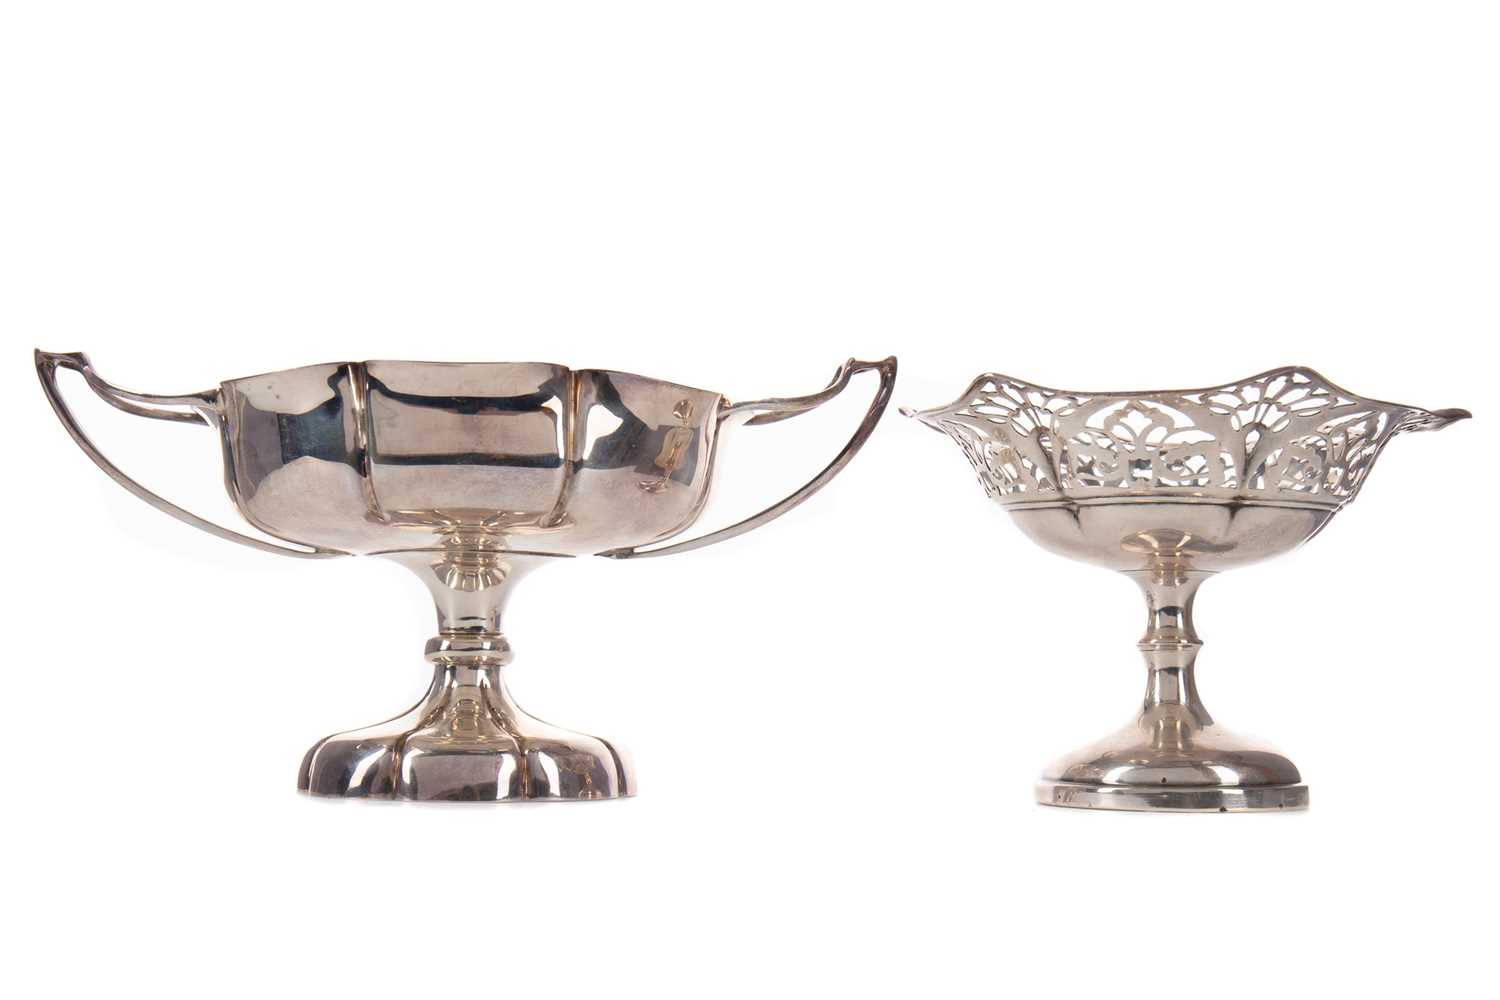 Lot 433 - AN EDWARDIAN SILVER BONBON DISH AND ANOTHER